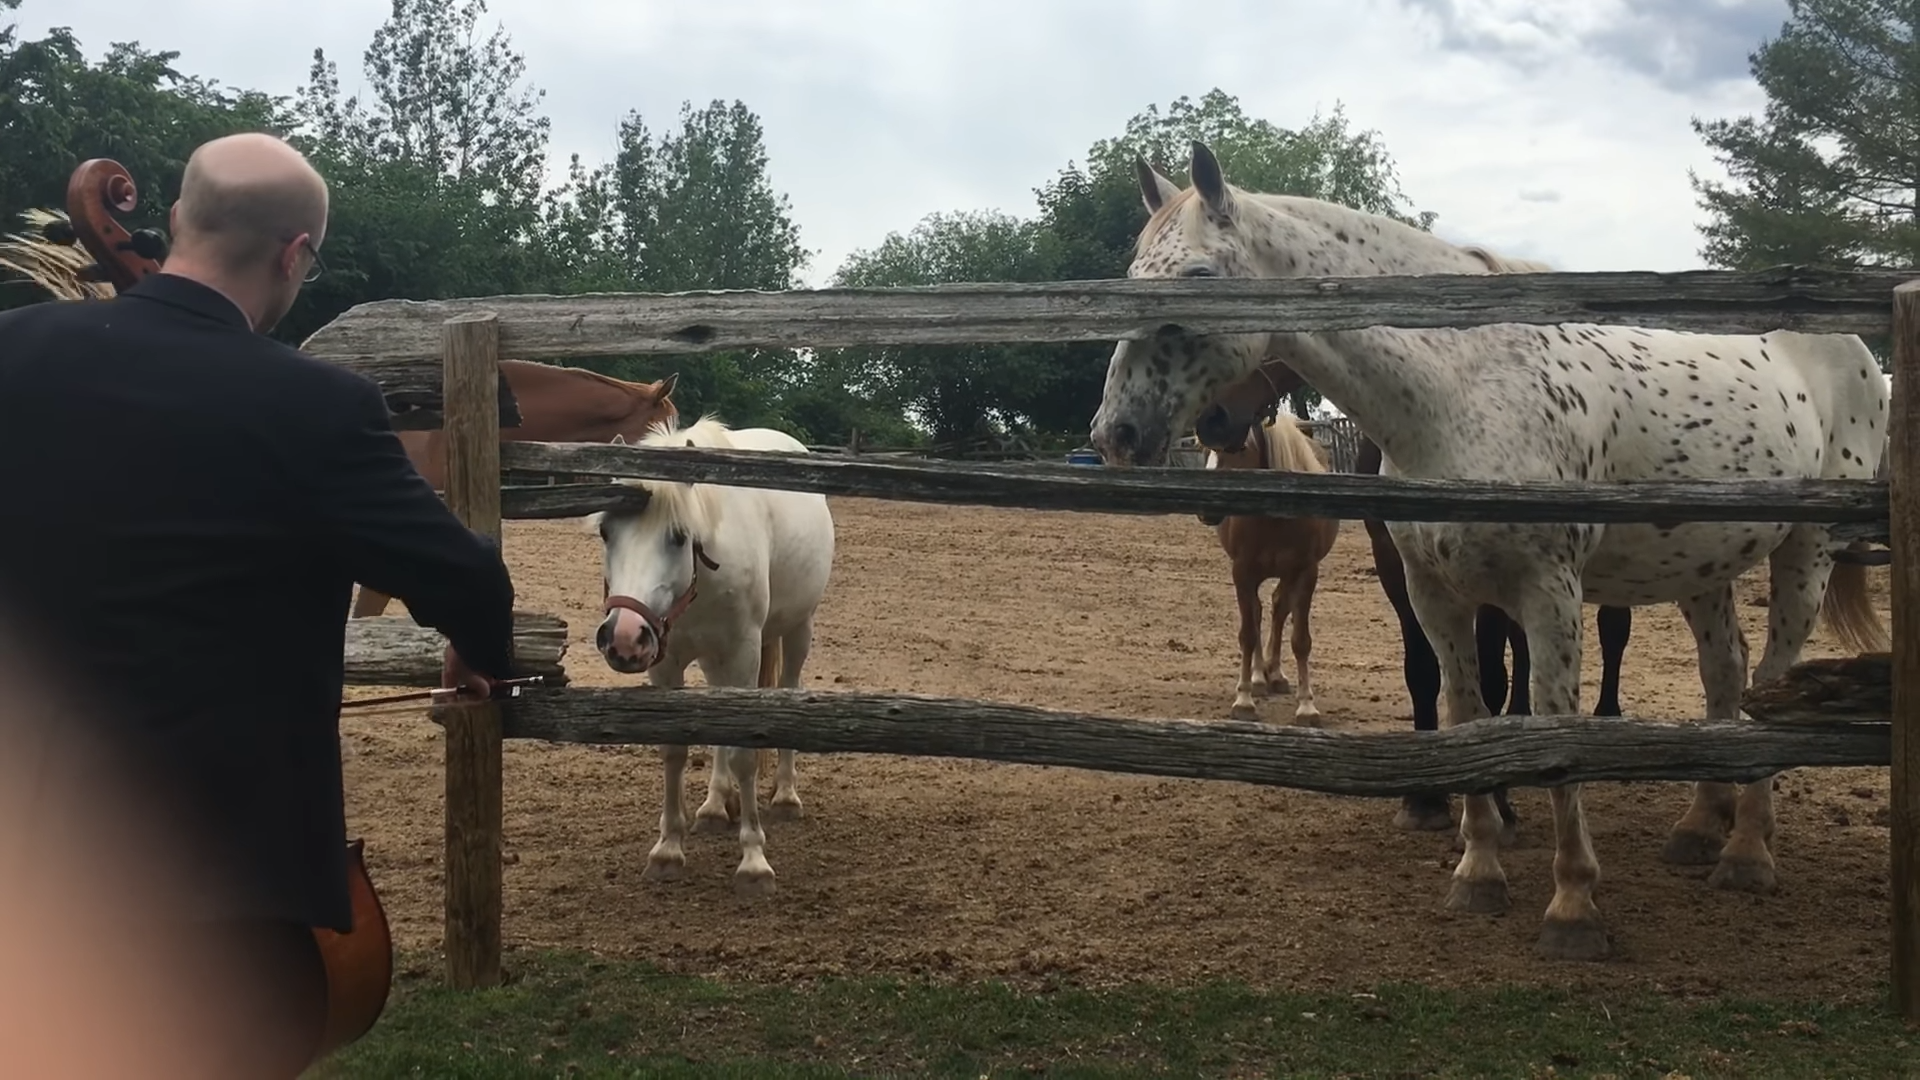 Maп Plays Bach for Horses-Their Adorable Reactioп Goes Viral!